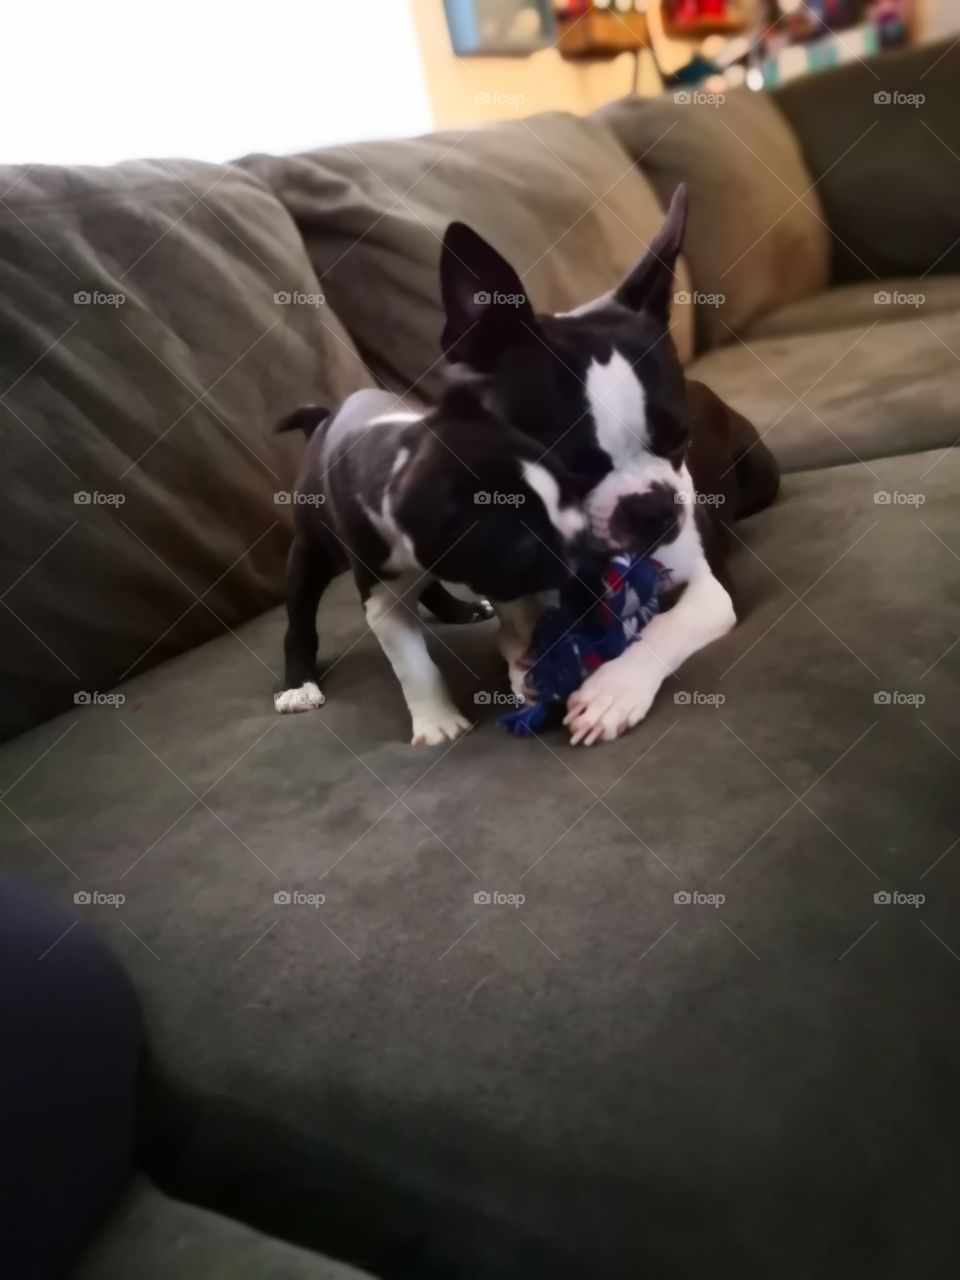 ace and bozo the Boston Terriers just playing with their new toy rope!